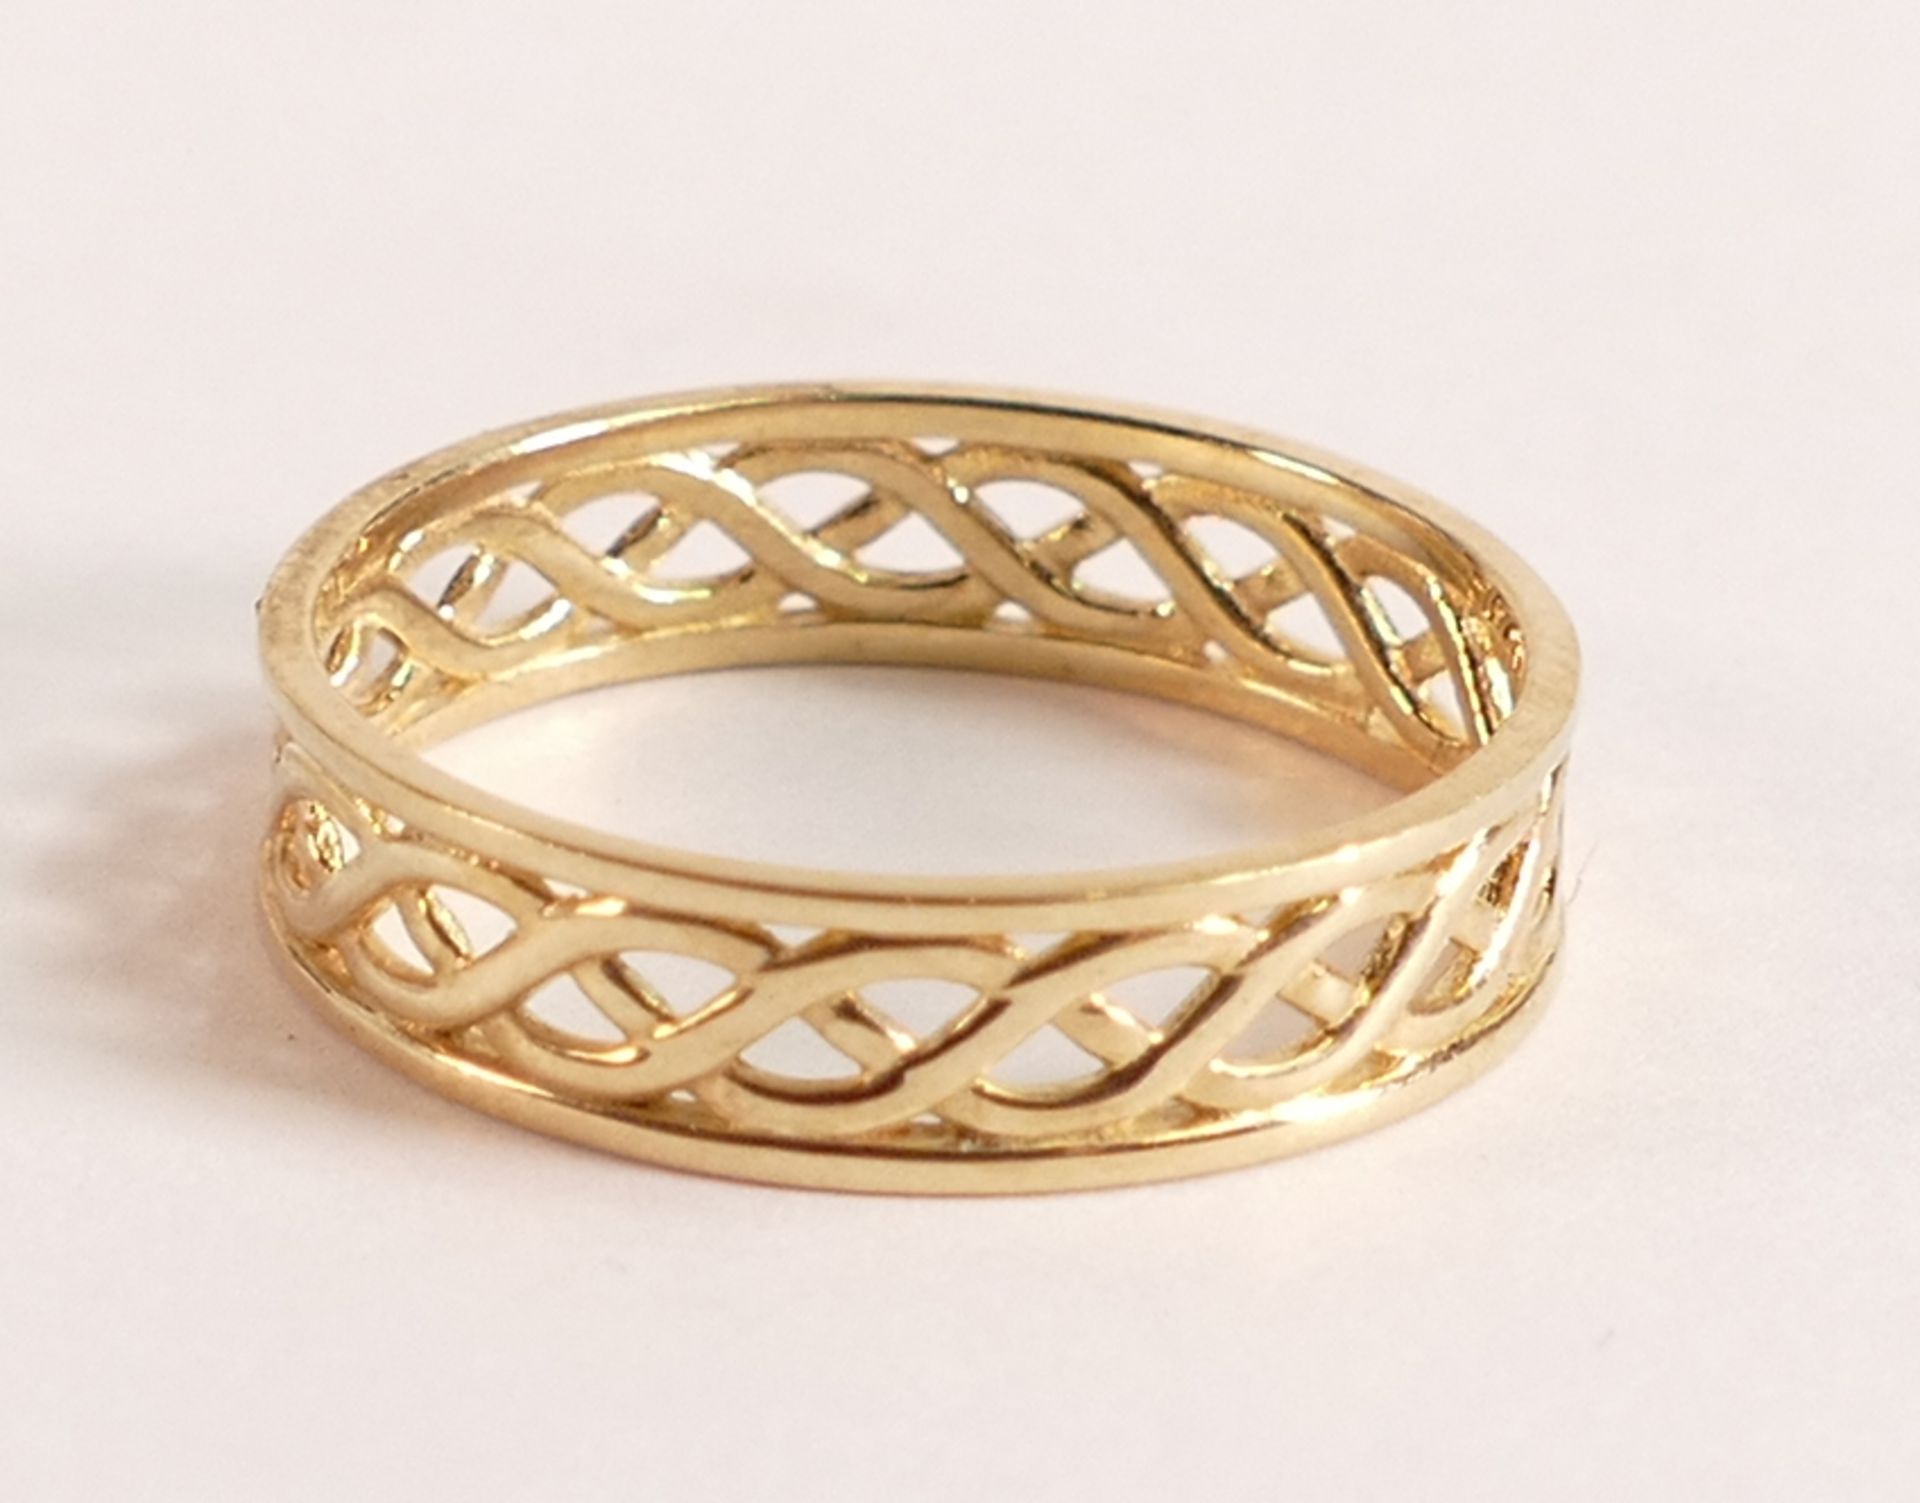 9ct Gold Celtic Band Ring - xxx grams. 9ct Yellow Gold, Celtic Design - Highly Polished - Size T, - Image 2 of 3